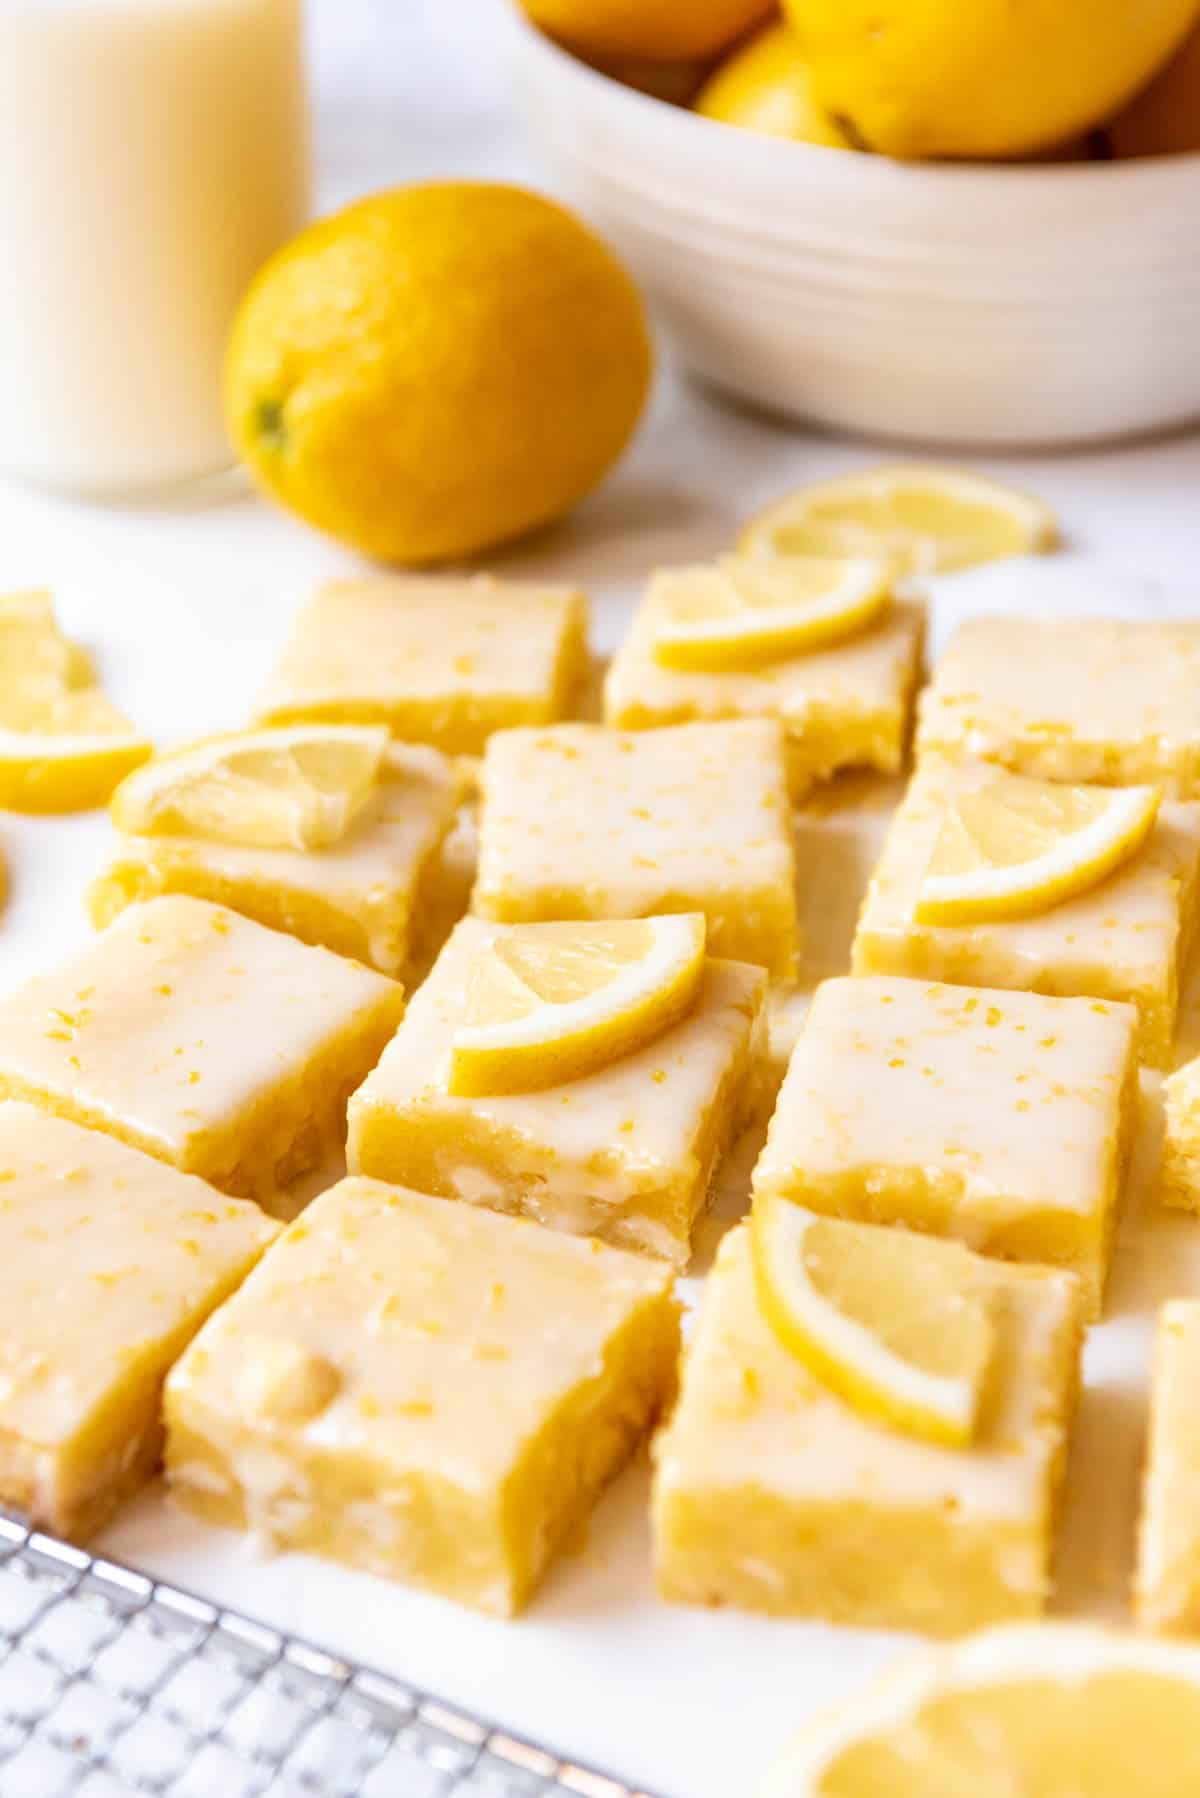 Lemon brownies with thinly sliced lemon wedges on top for decoration.